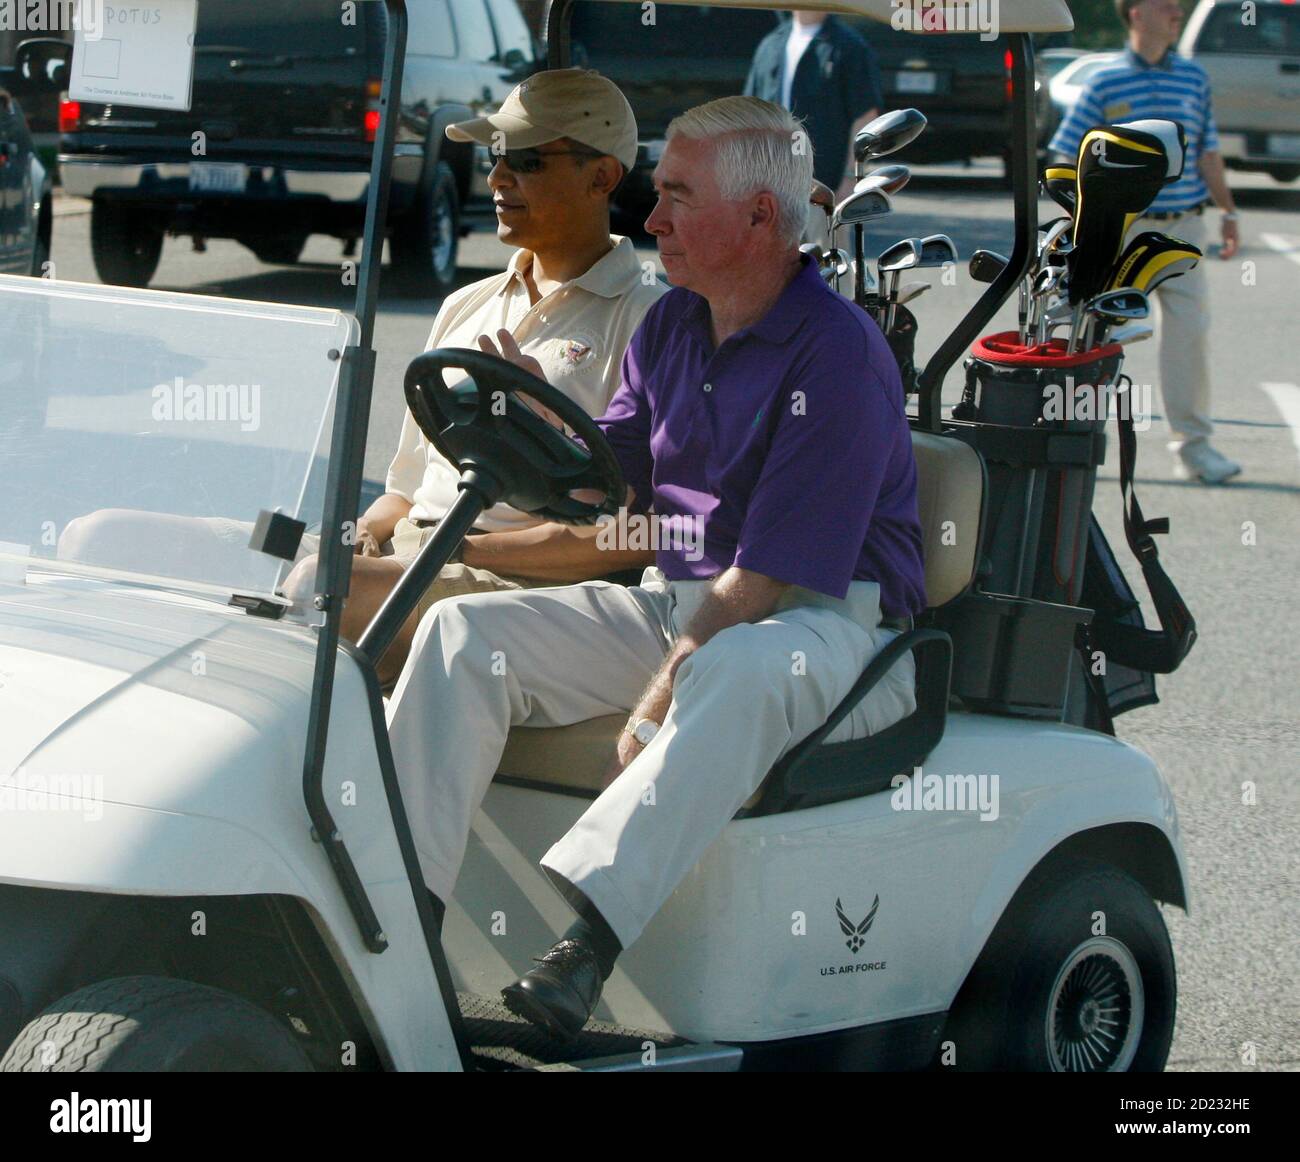 U.S. President Barack Obama (L) rides in a golf cart driven by Mike Thomas,  General Manager of the Andrews Air Force Base golf course, as they prepare  to play a round of